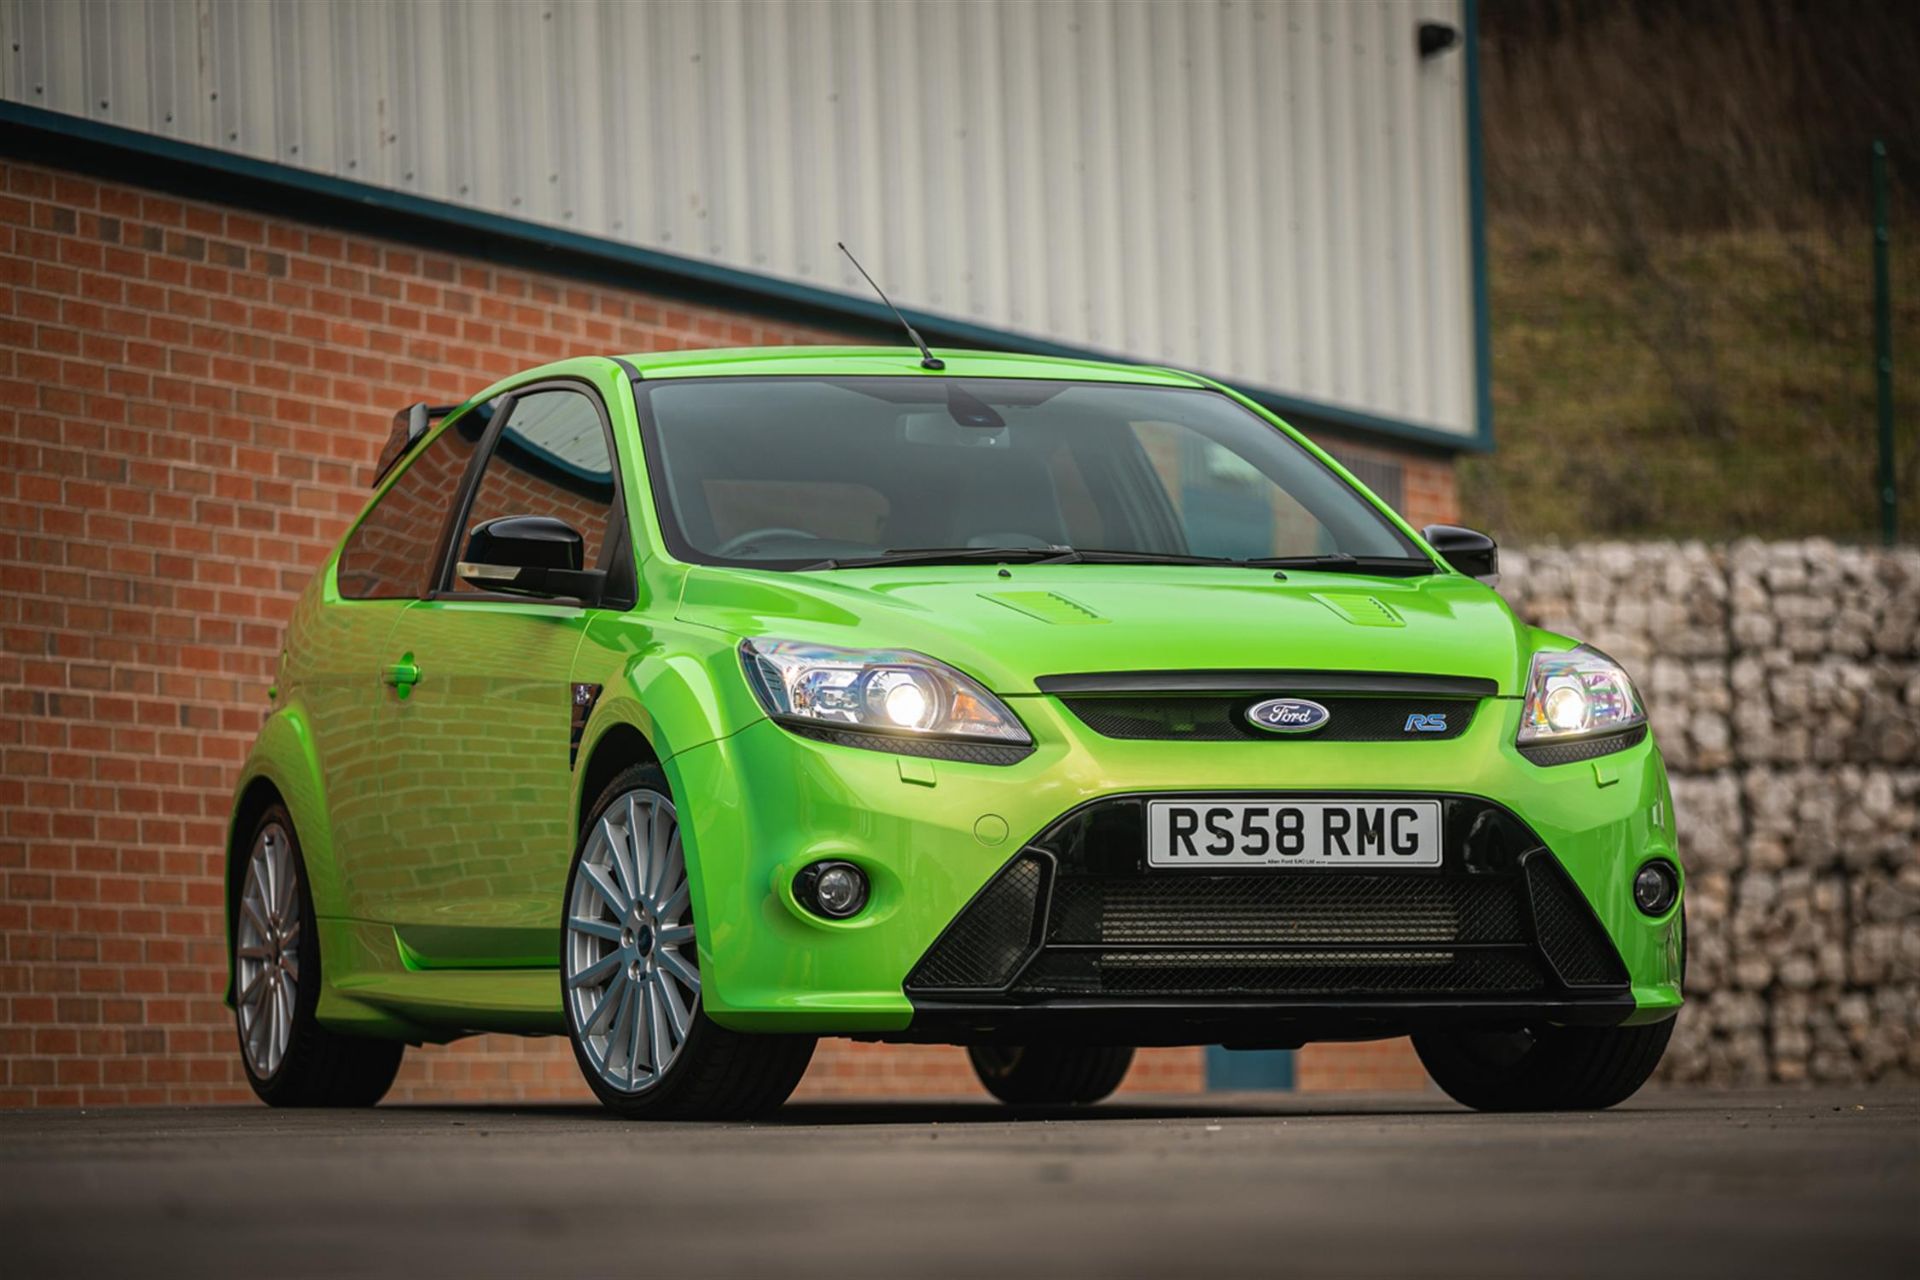 2010 Ford Focus RS Mk2 - Image 9 of 10